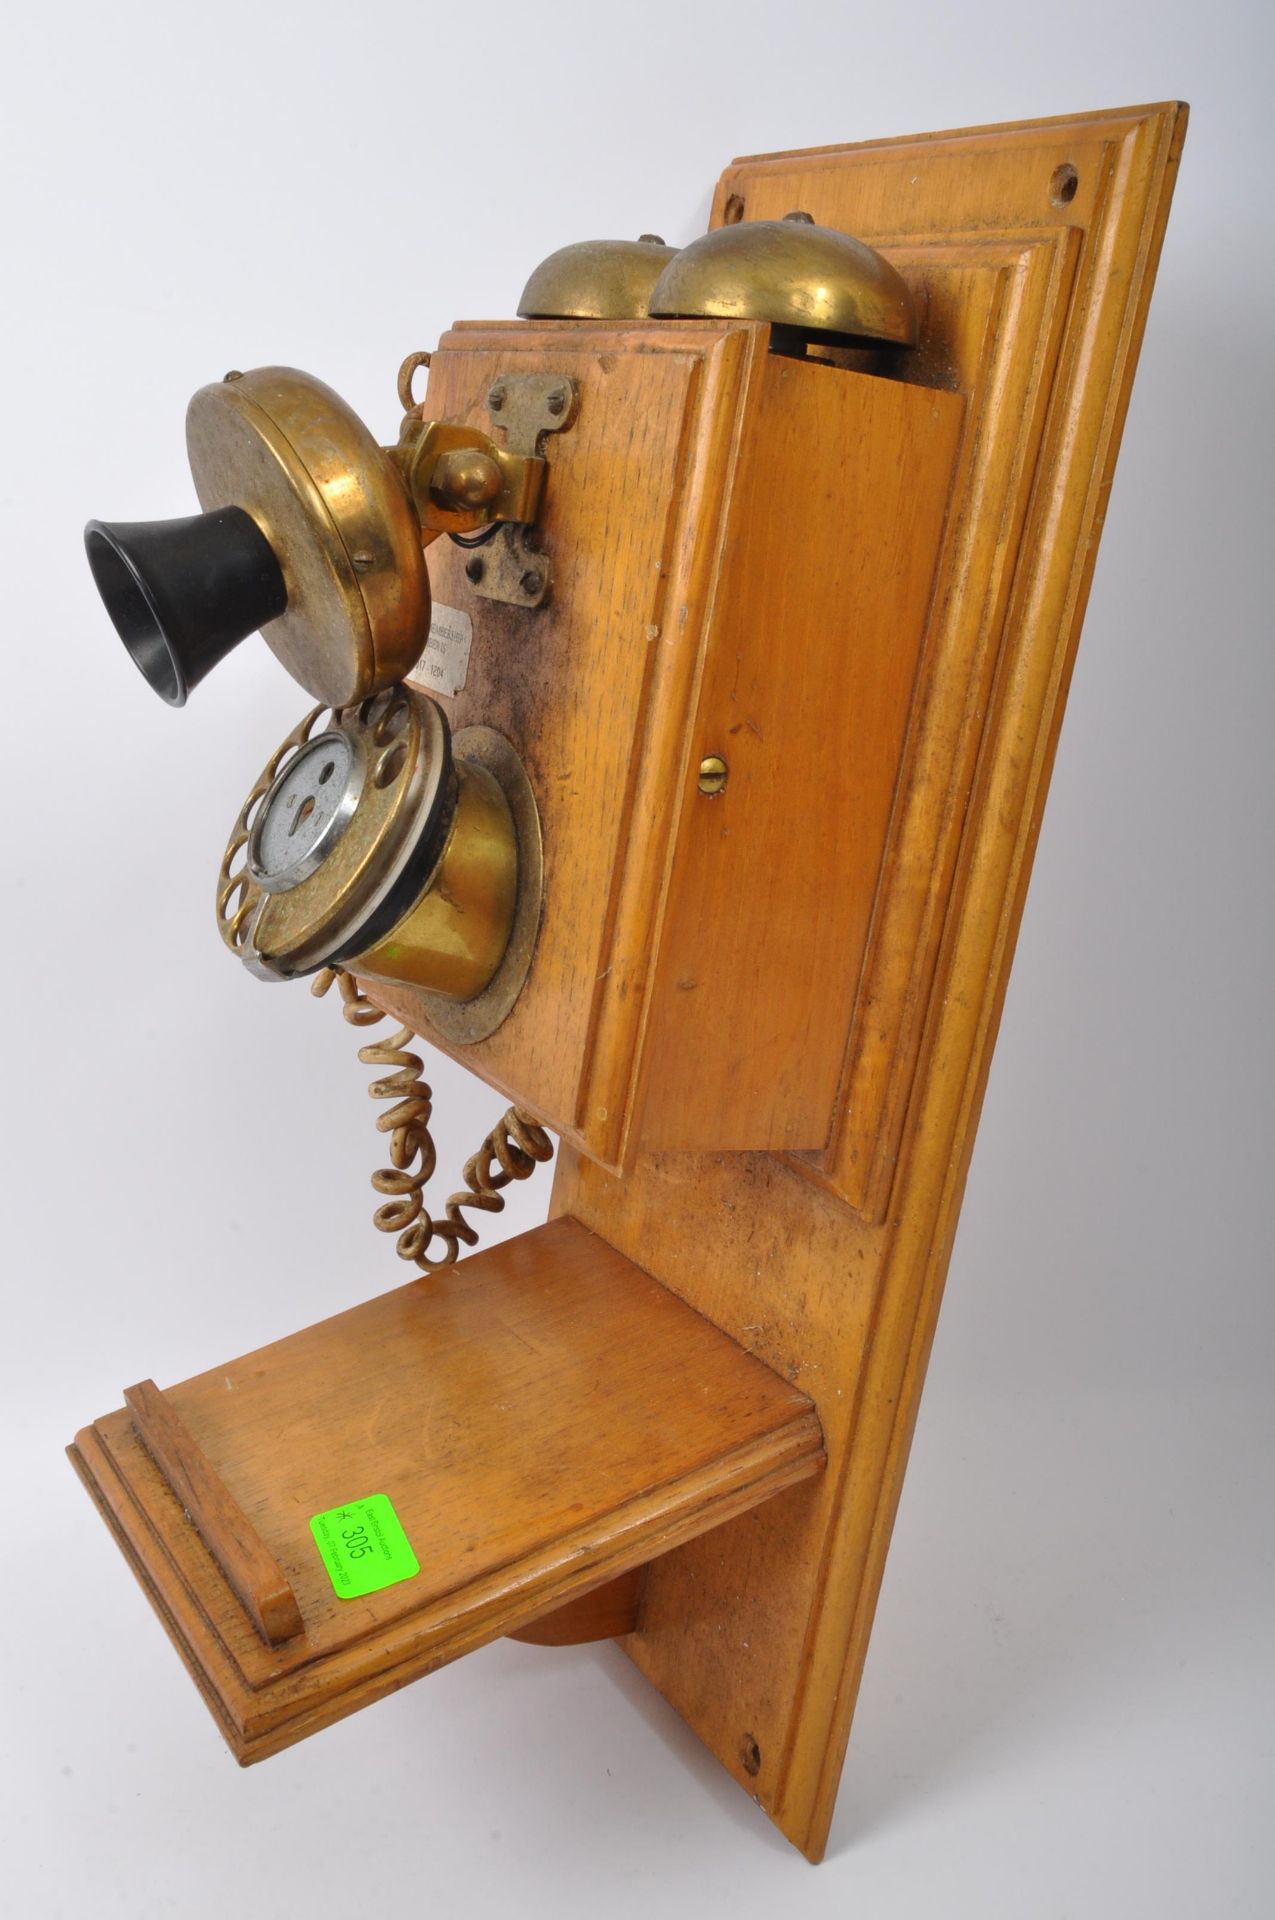 VINTAGE 1940S STYLE WALL MOUNTED WOODEN CASED TELEPHONE - Image 2 of 5